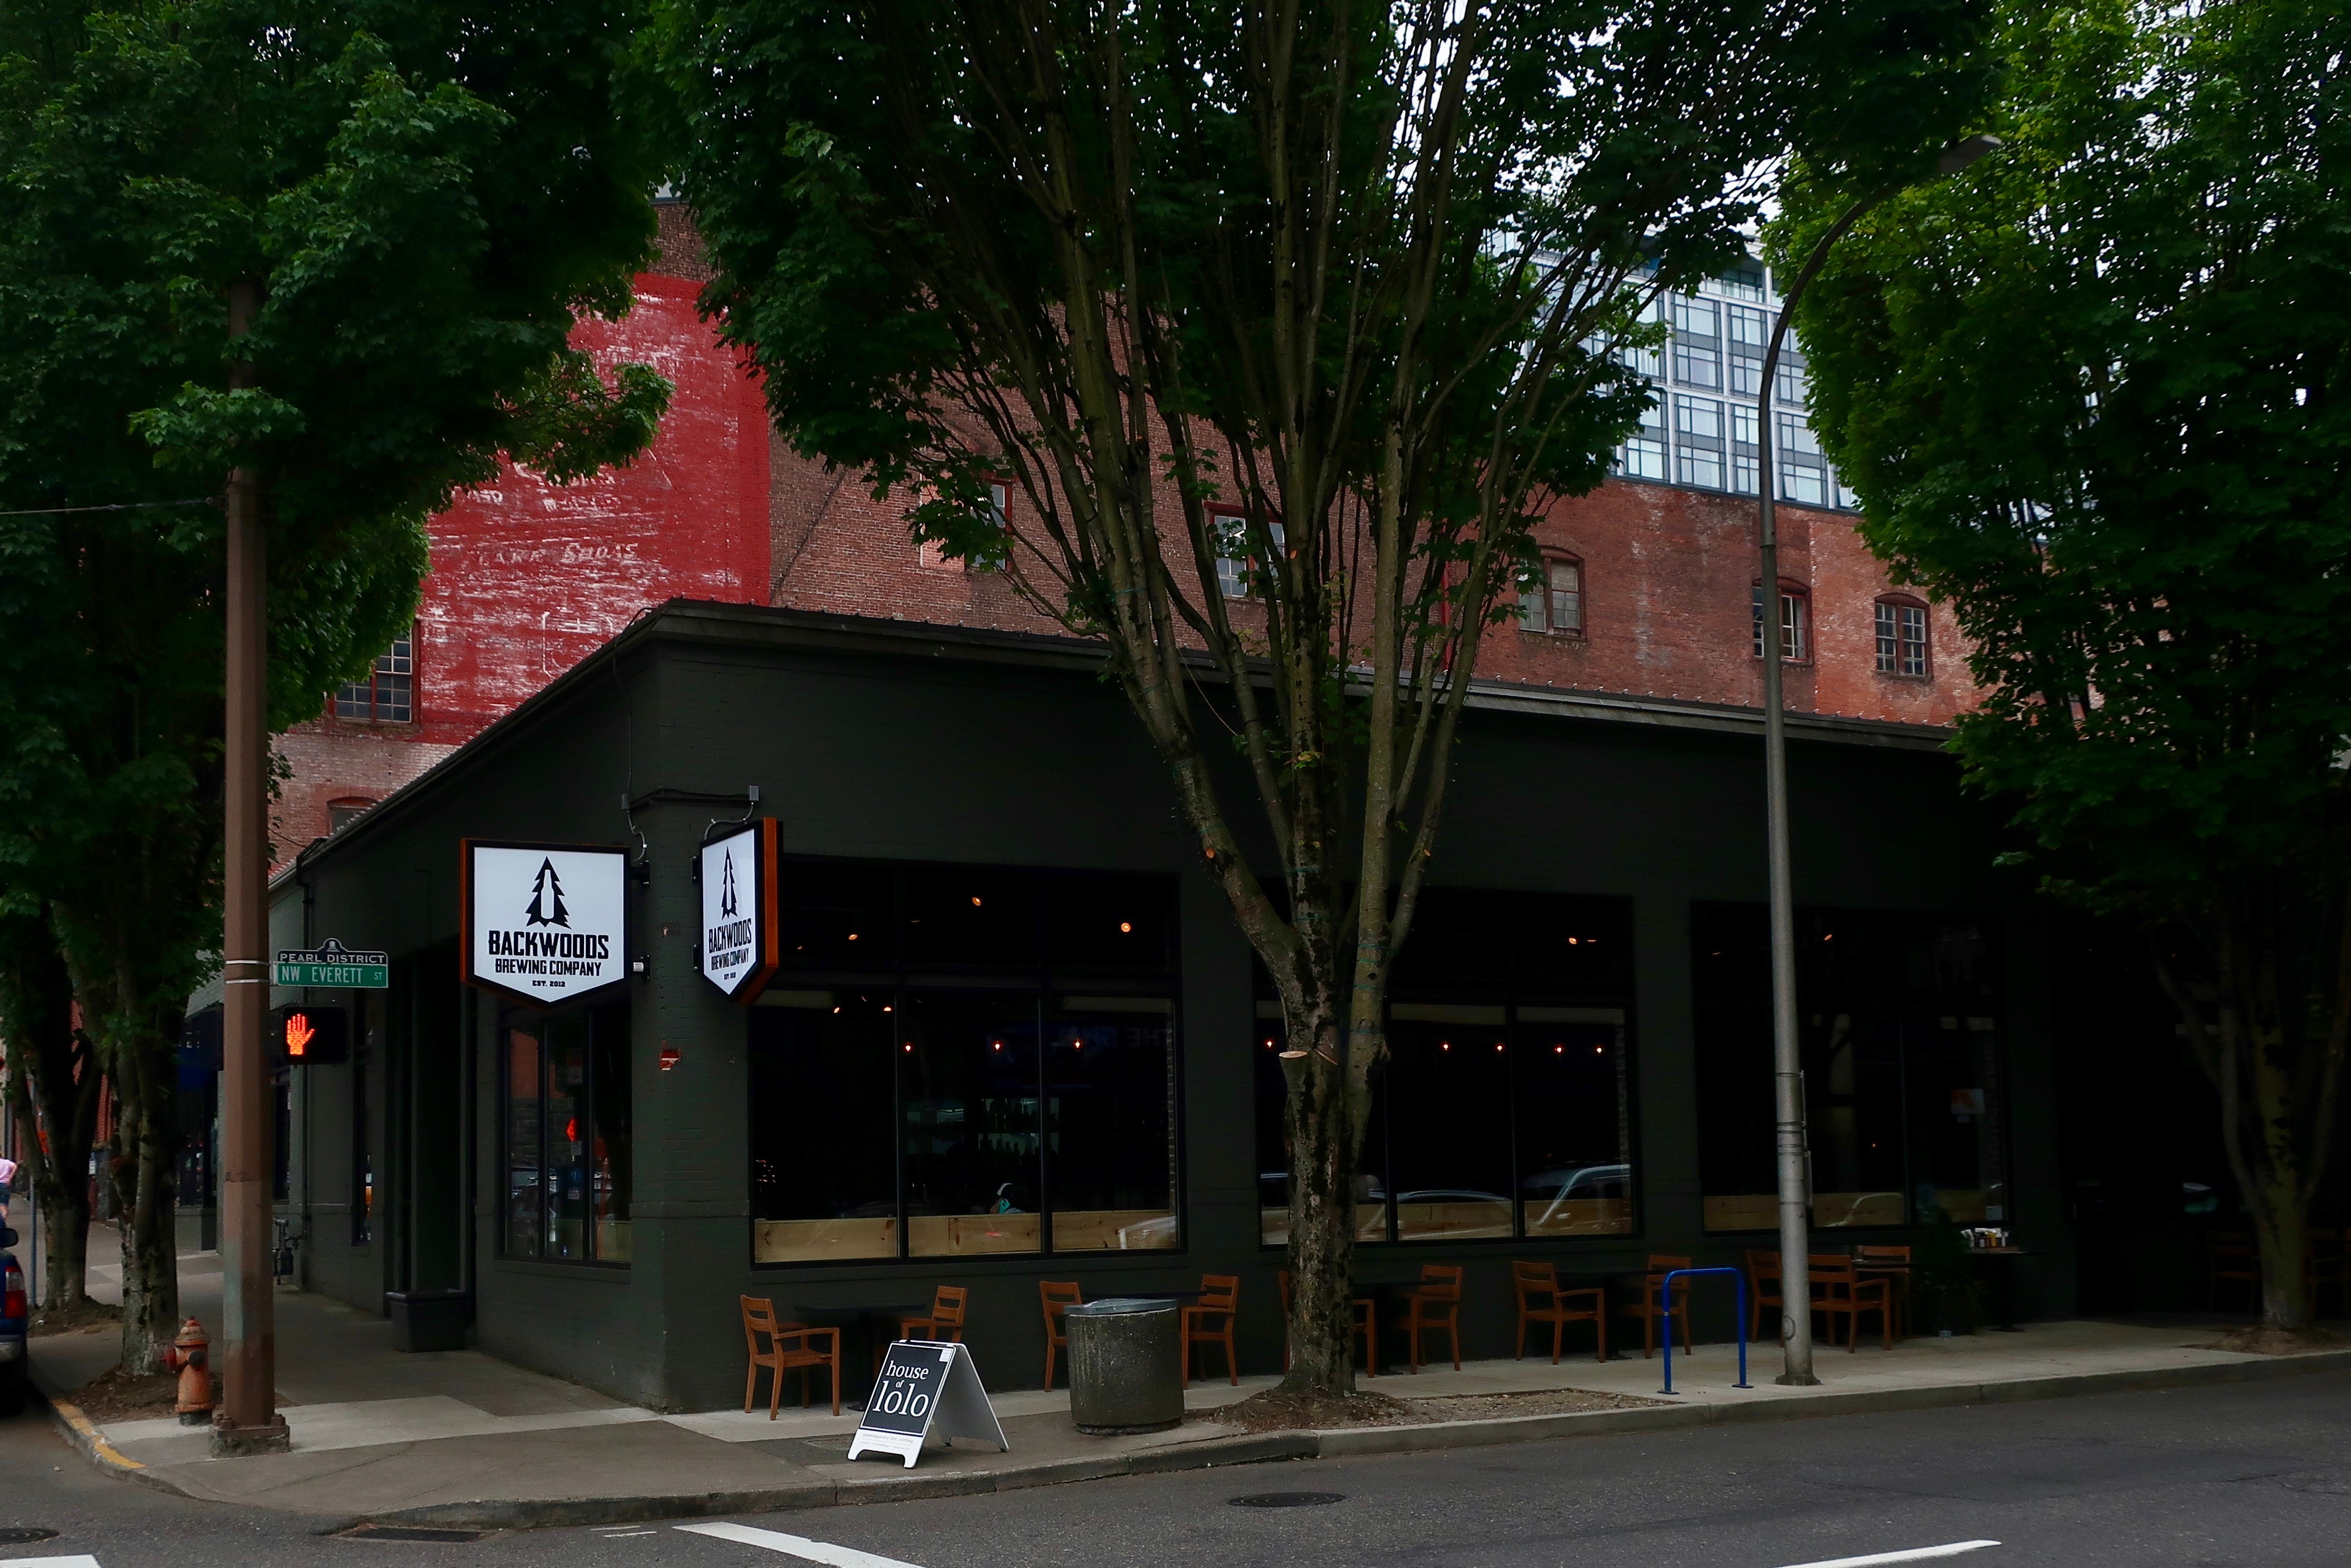 Backwoods In The Pearl is located at the corner of NW Everett and NW 11th Avenue in Portland's Pearl District.